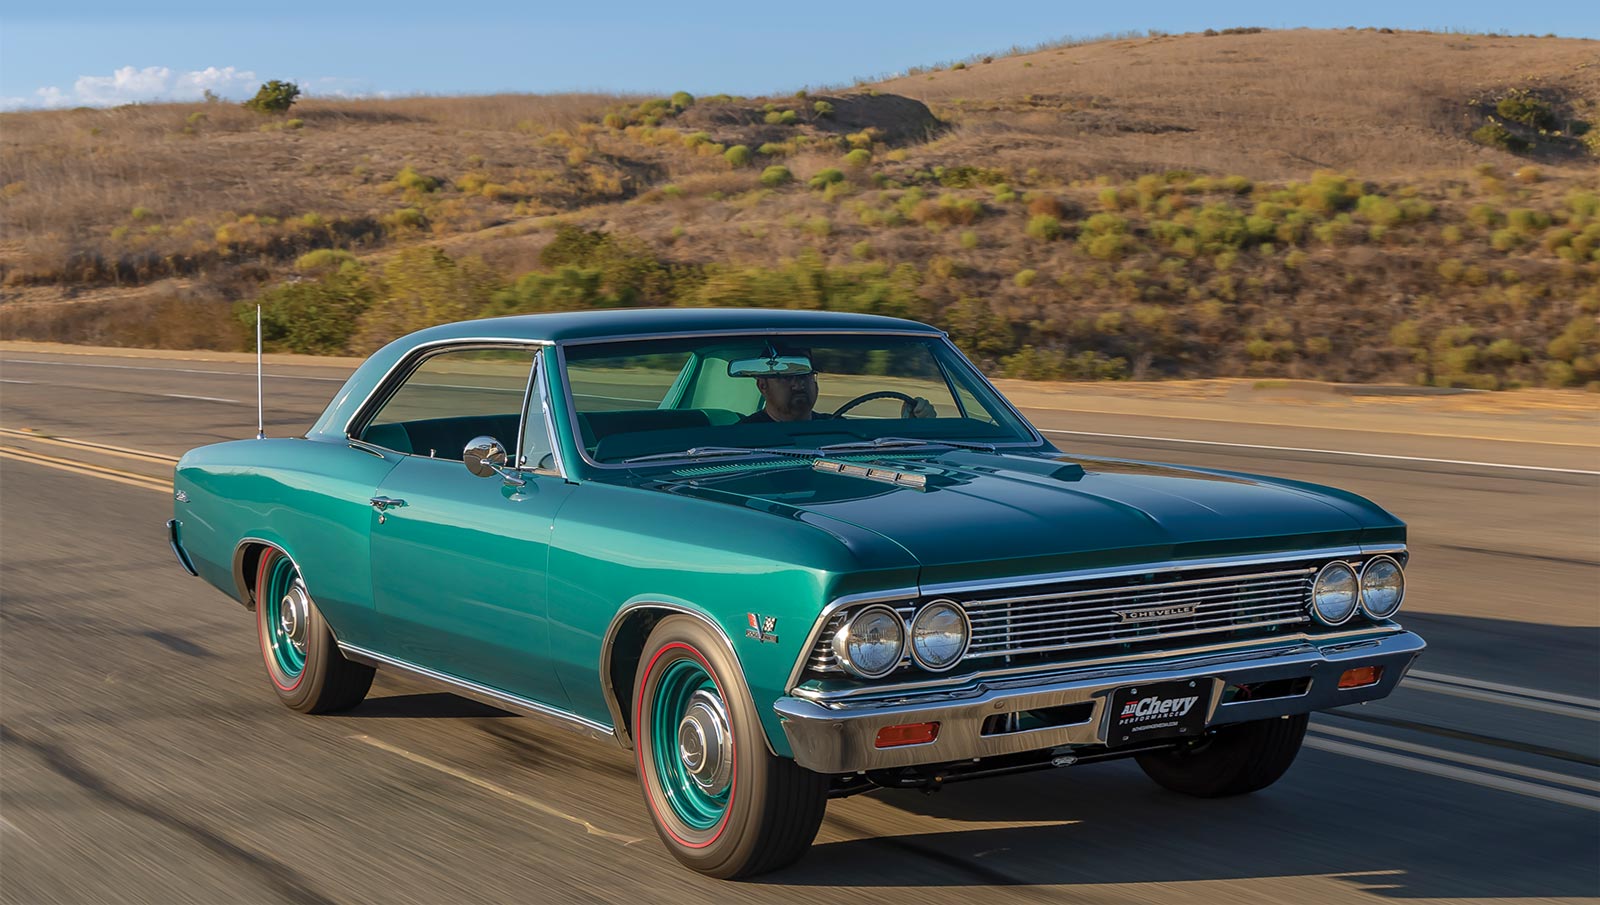 Metallic teal '66 Chevelle Malibu on road with hills in background